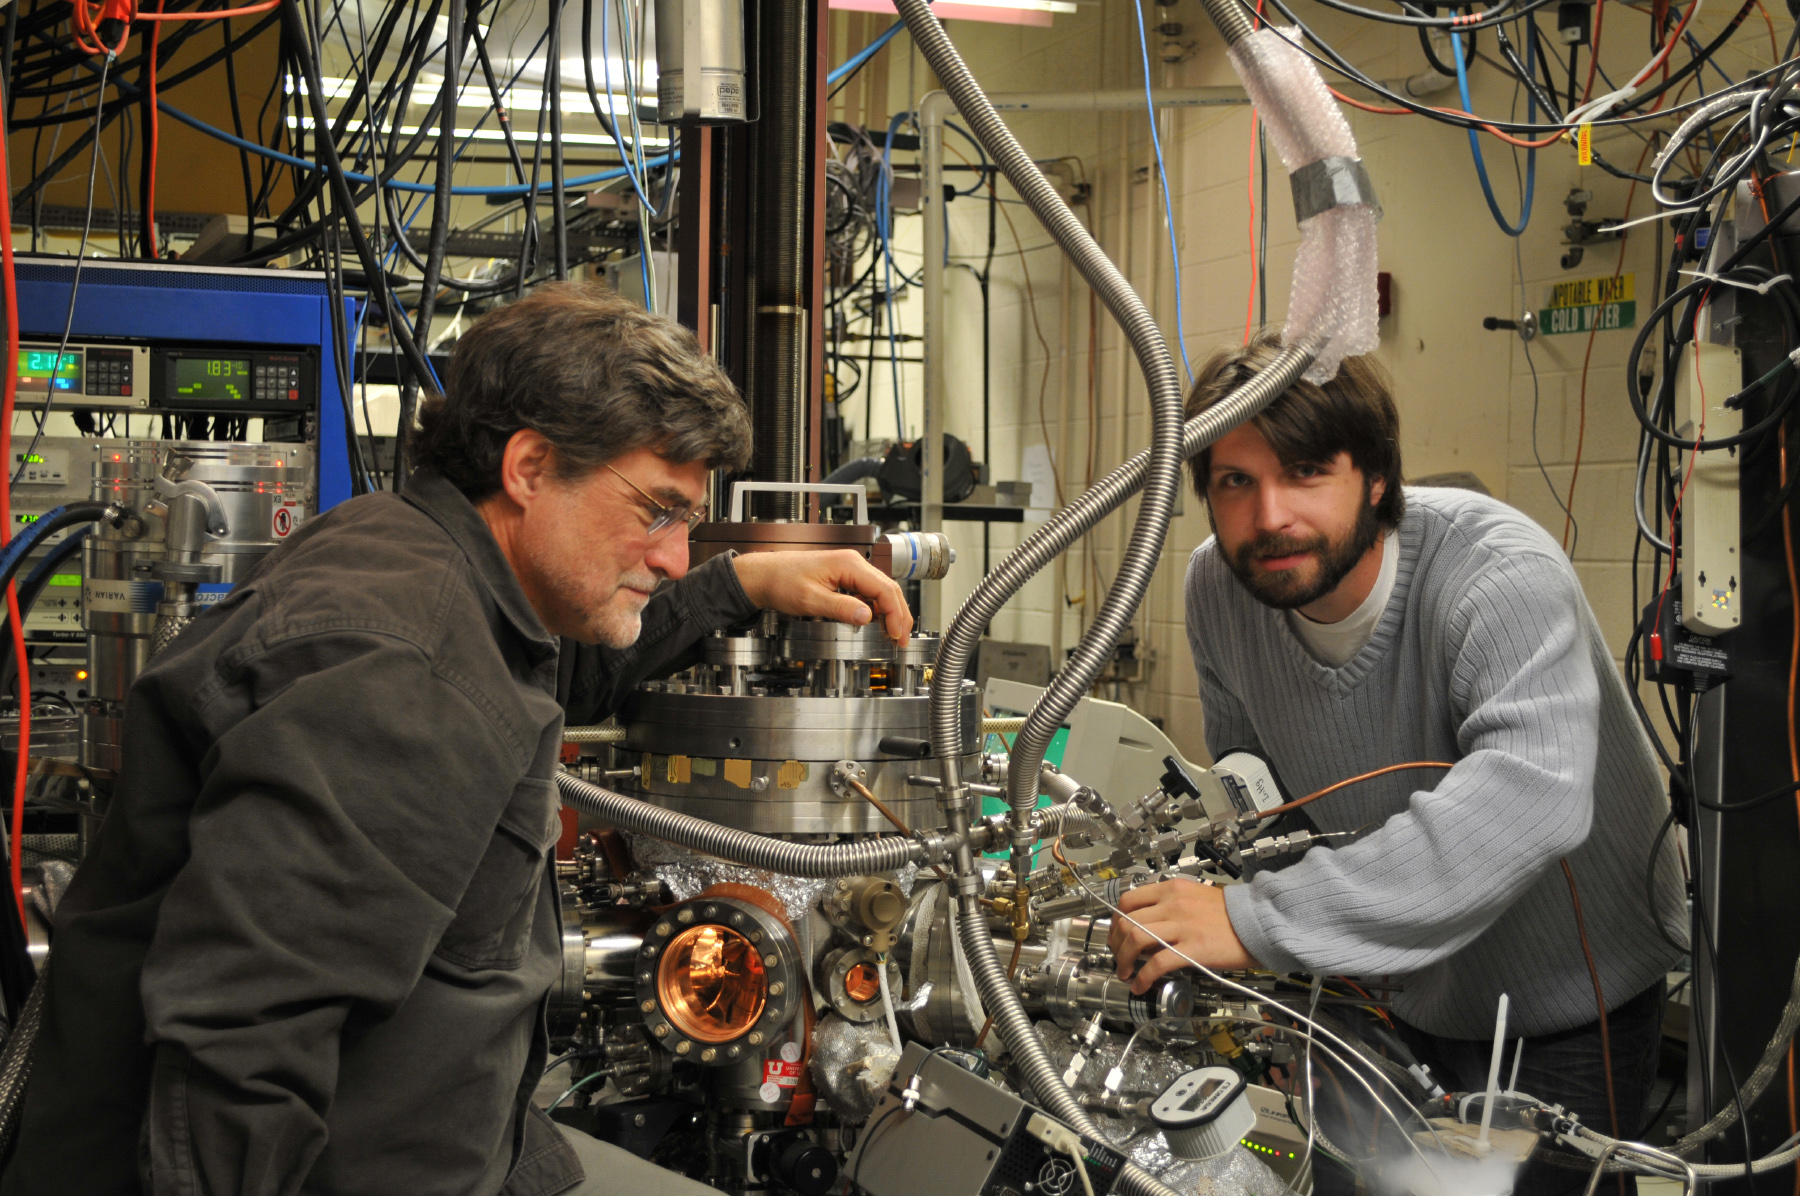 University of Utah chemistry Prof. Scott Anderson and doctoral student Bill Kaden work on the elaborate apparatus they use to produce and study catalysts, which are substances that speed chemical reactions without being consumed. The world economy depends on catalysts, and the Utah research is aimed at making cheaper, more efficient catalysts, which could improve energy production and reduce emissions of Earth-warming gases.